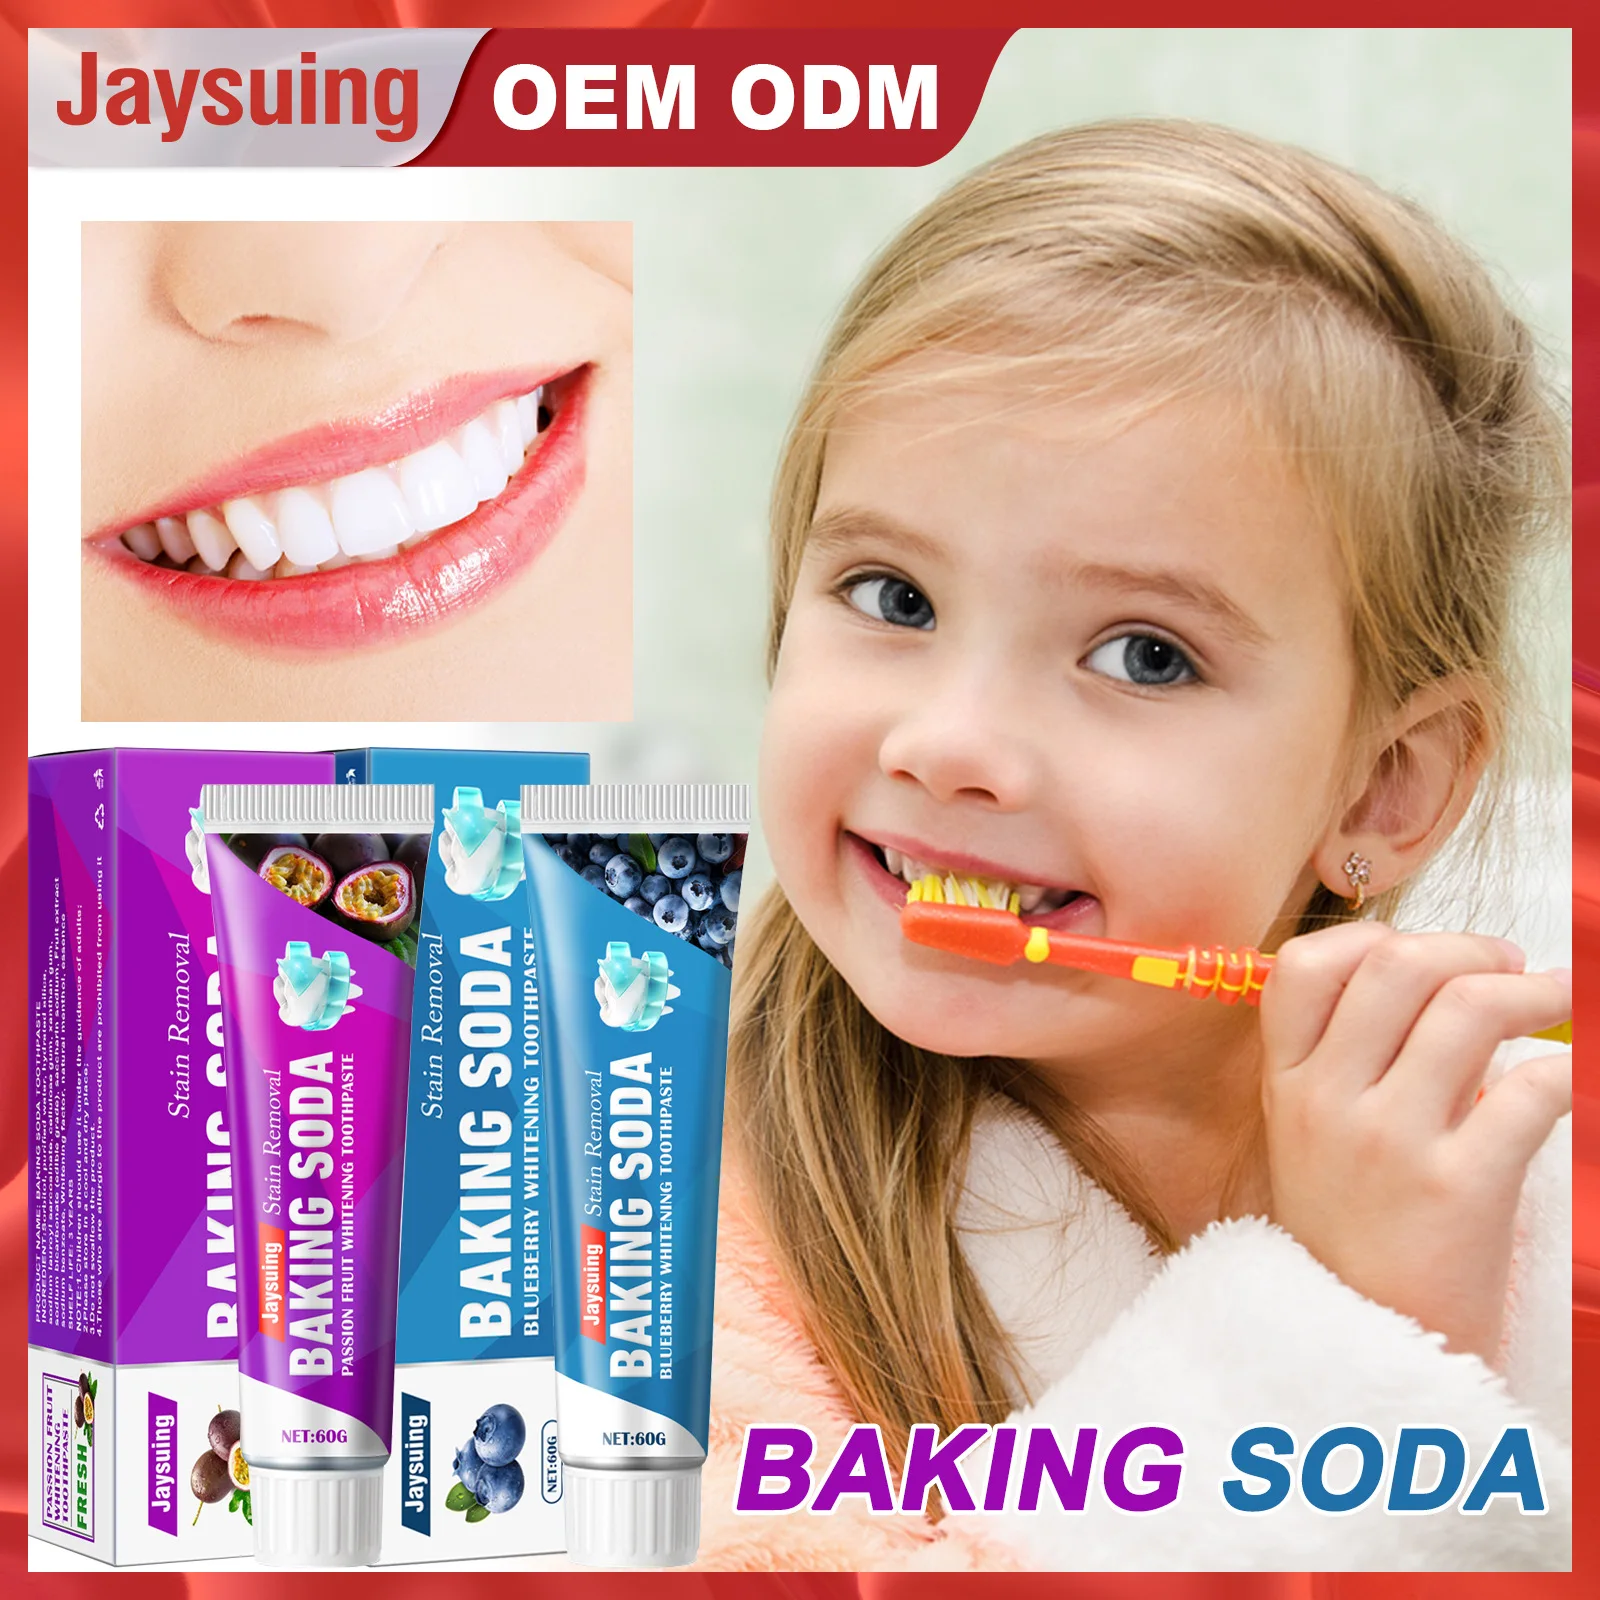 

Jaysuing Baking Soda Fruit Toothpaste Double Whitening Fresh Breath Fruity Remove Yellow Tooth Stains Oral Hygiene Cleaning Care